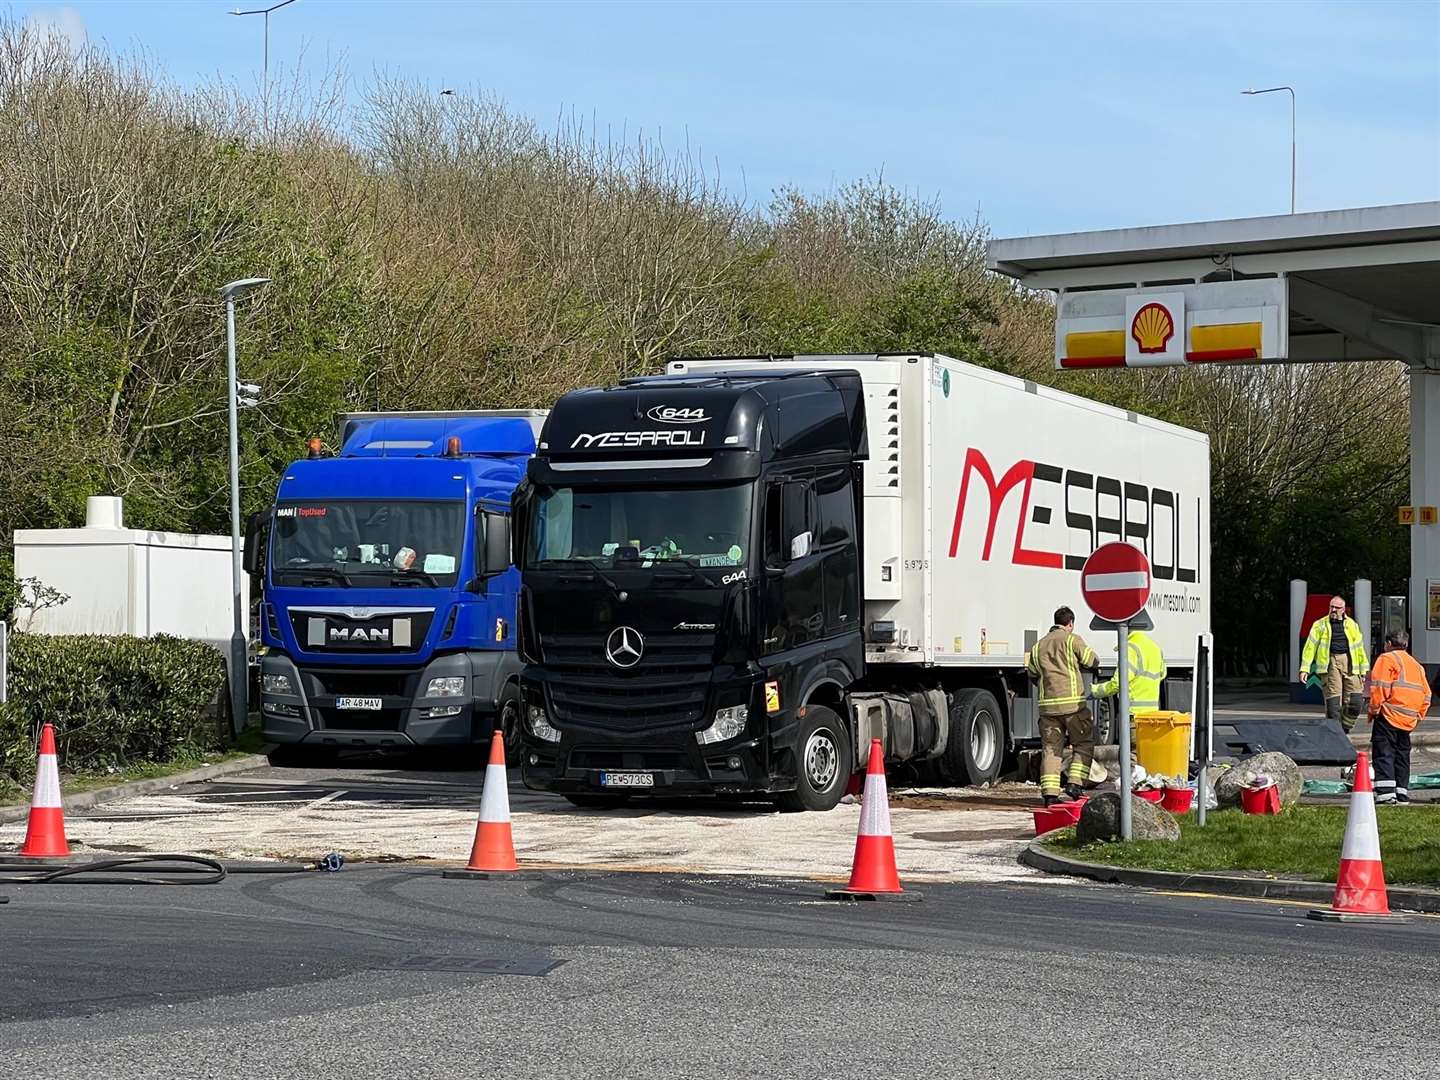 A lorry spilt fuel onto a forecourt after hitting a high concrete kerb. Picture: Barry Goodwin